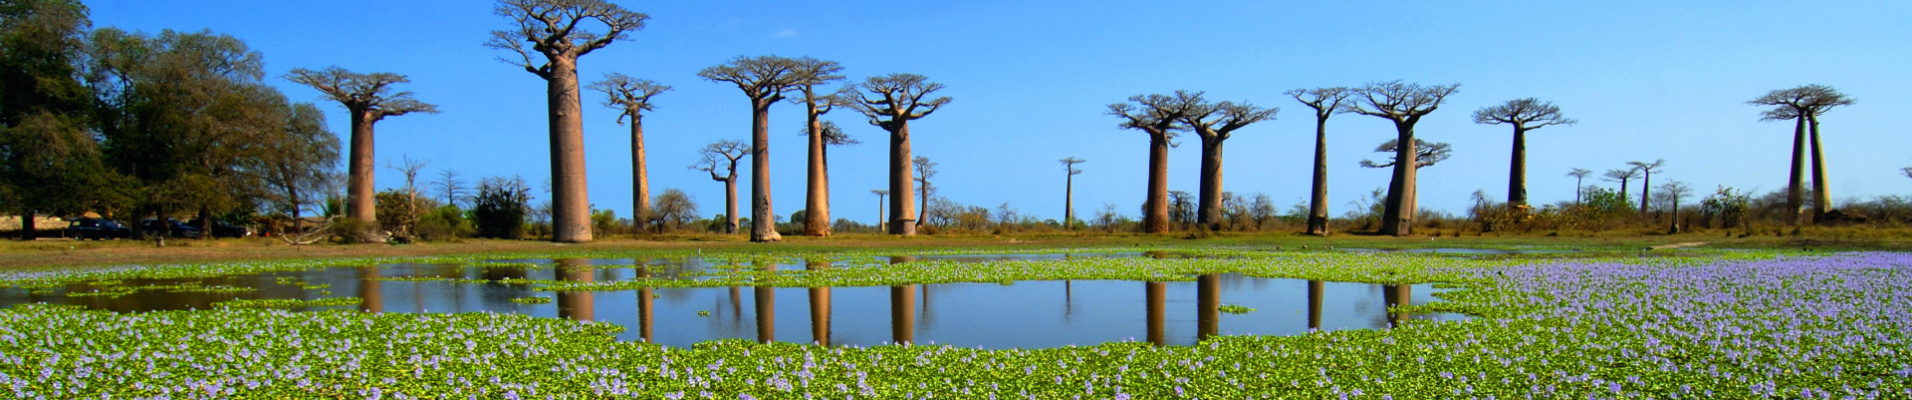 baobabs-nature-lac